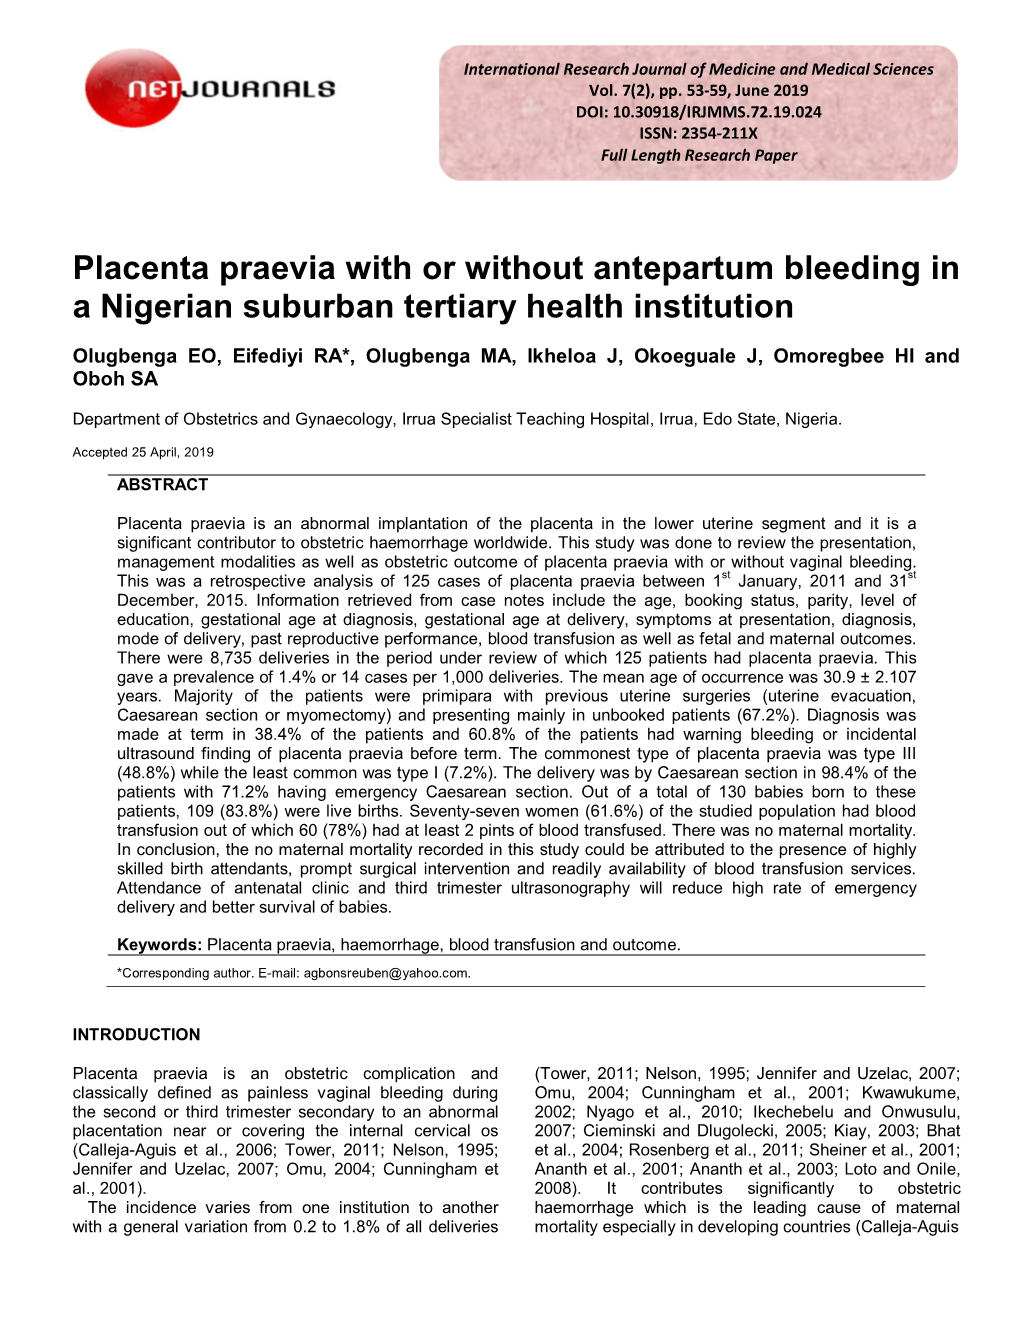 Placenta Praevia with Or Without Antepartum Bleeding in a Nigerian Suburban Tertiary Health Institution